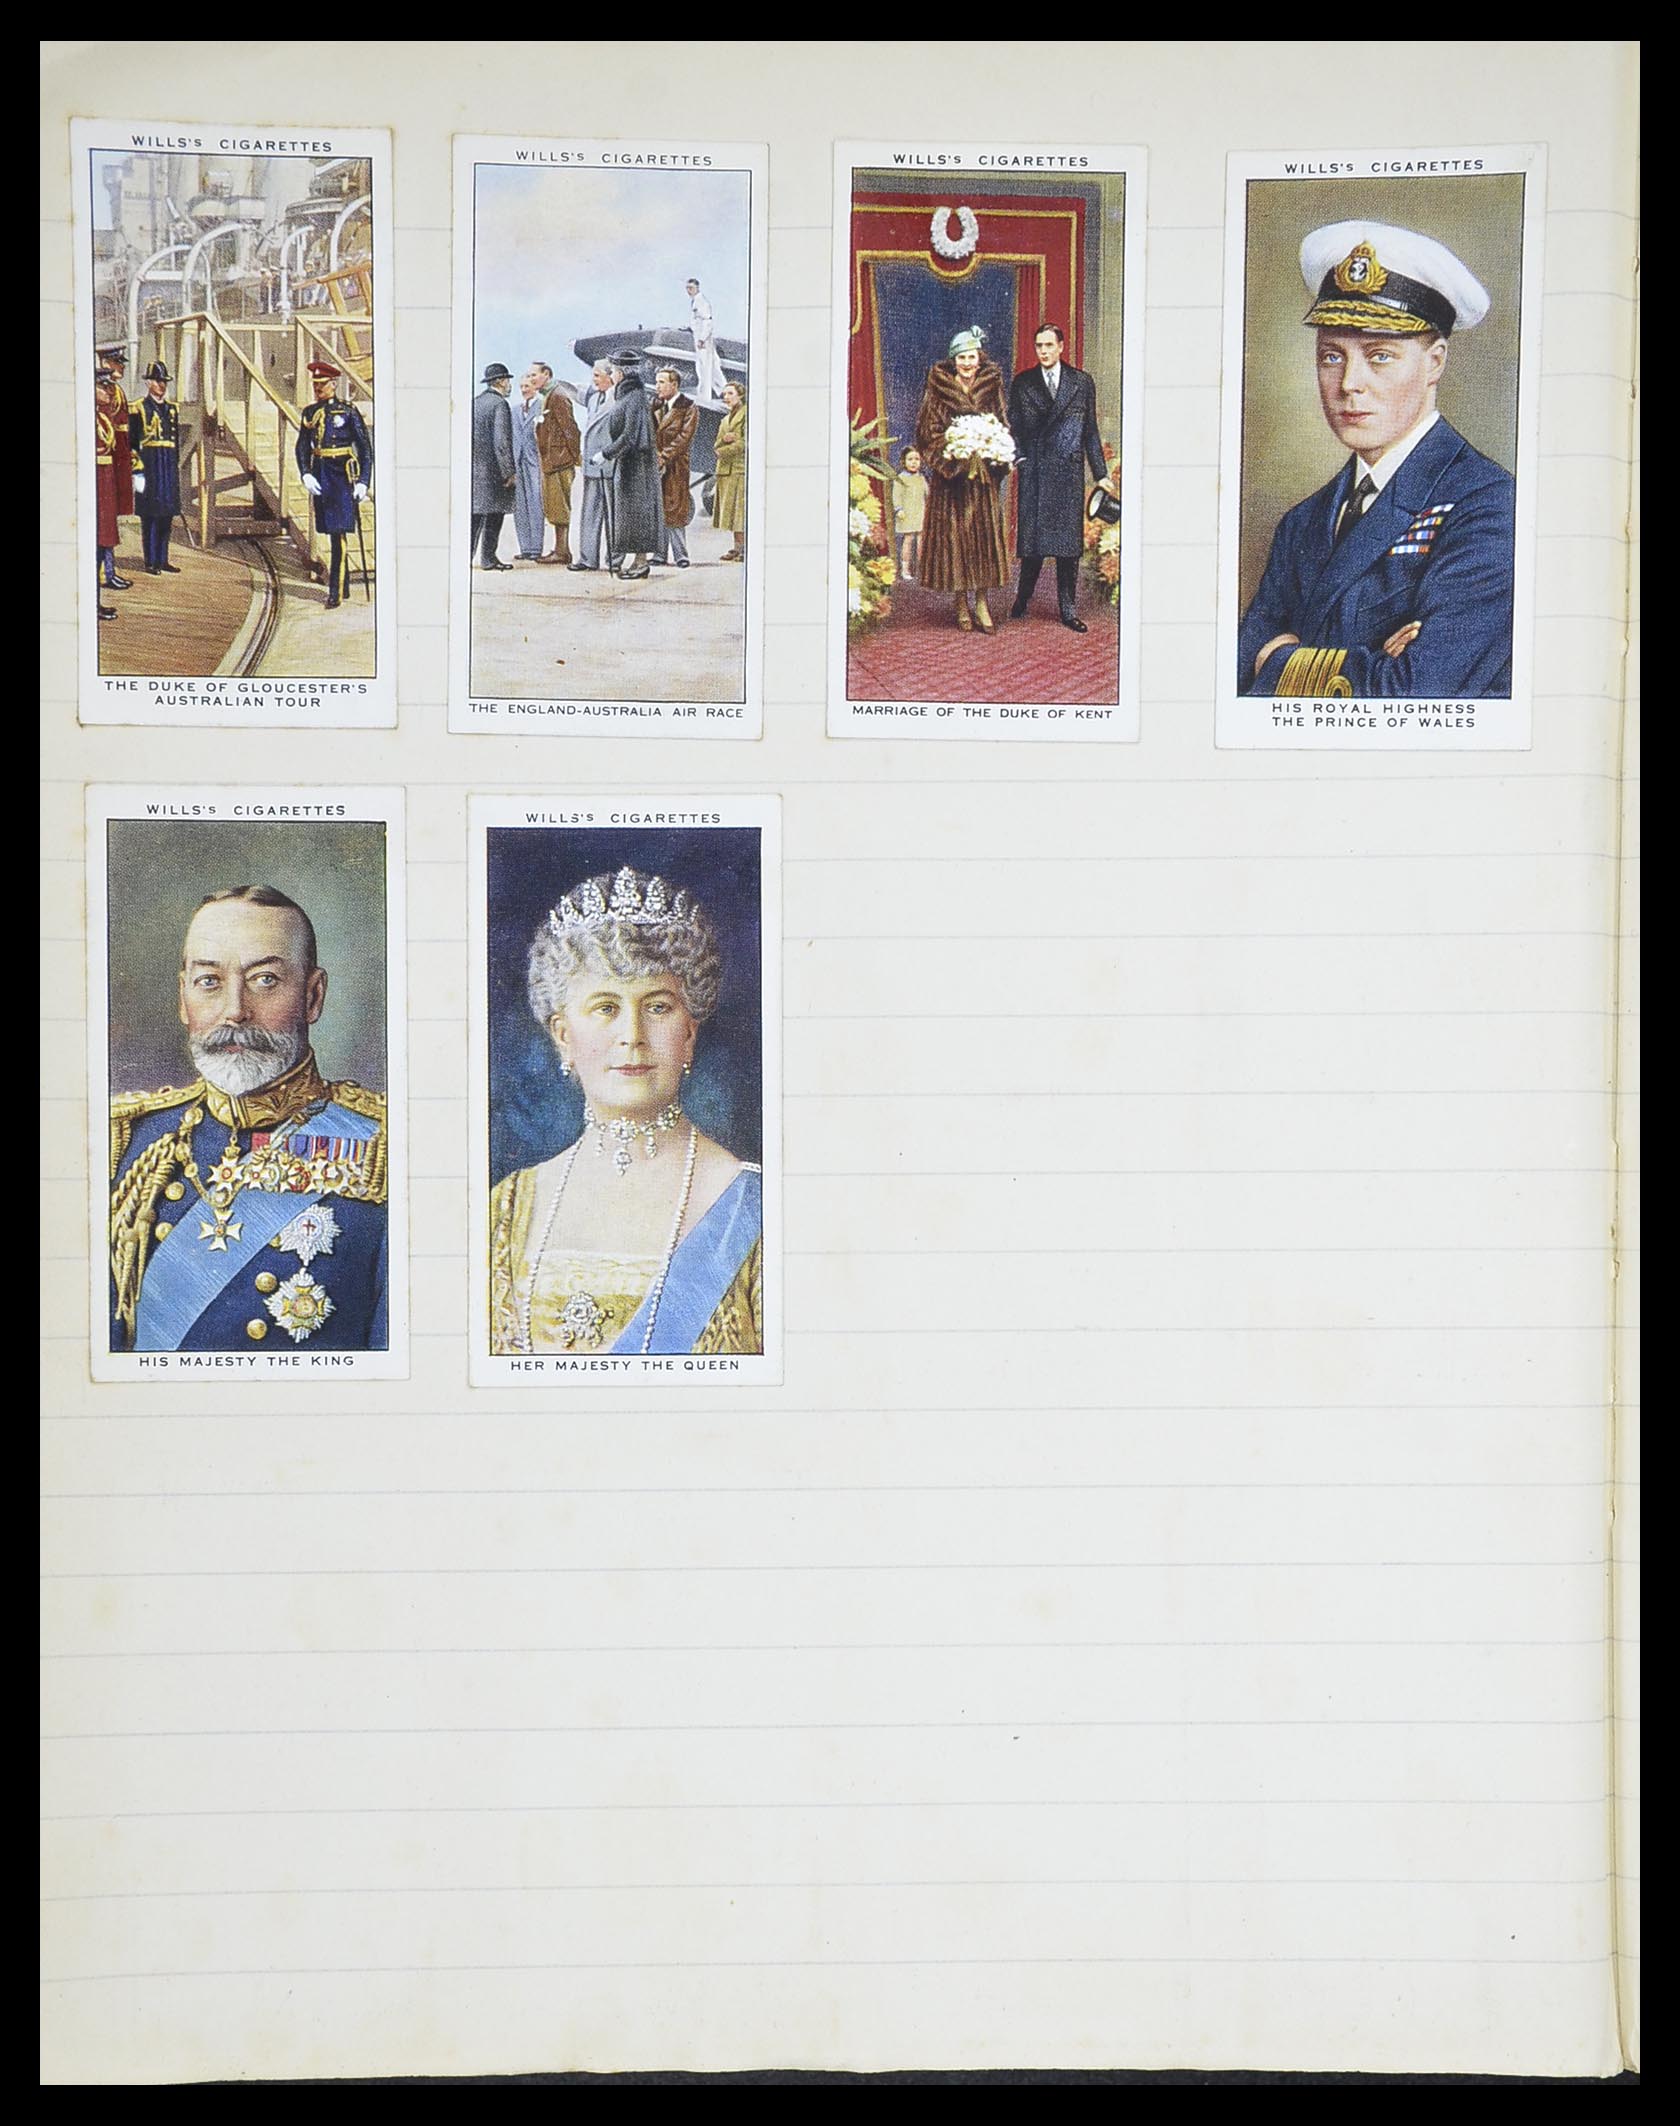 33444 042 - Stamp collection 33444 Great Britain cigarette cards.